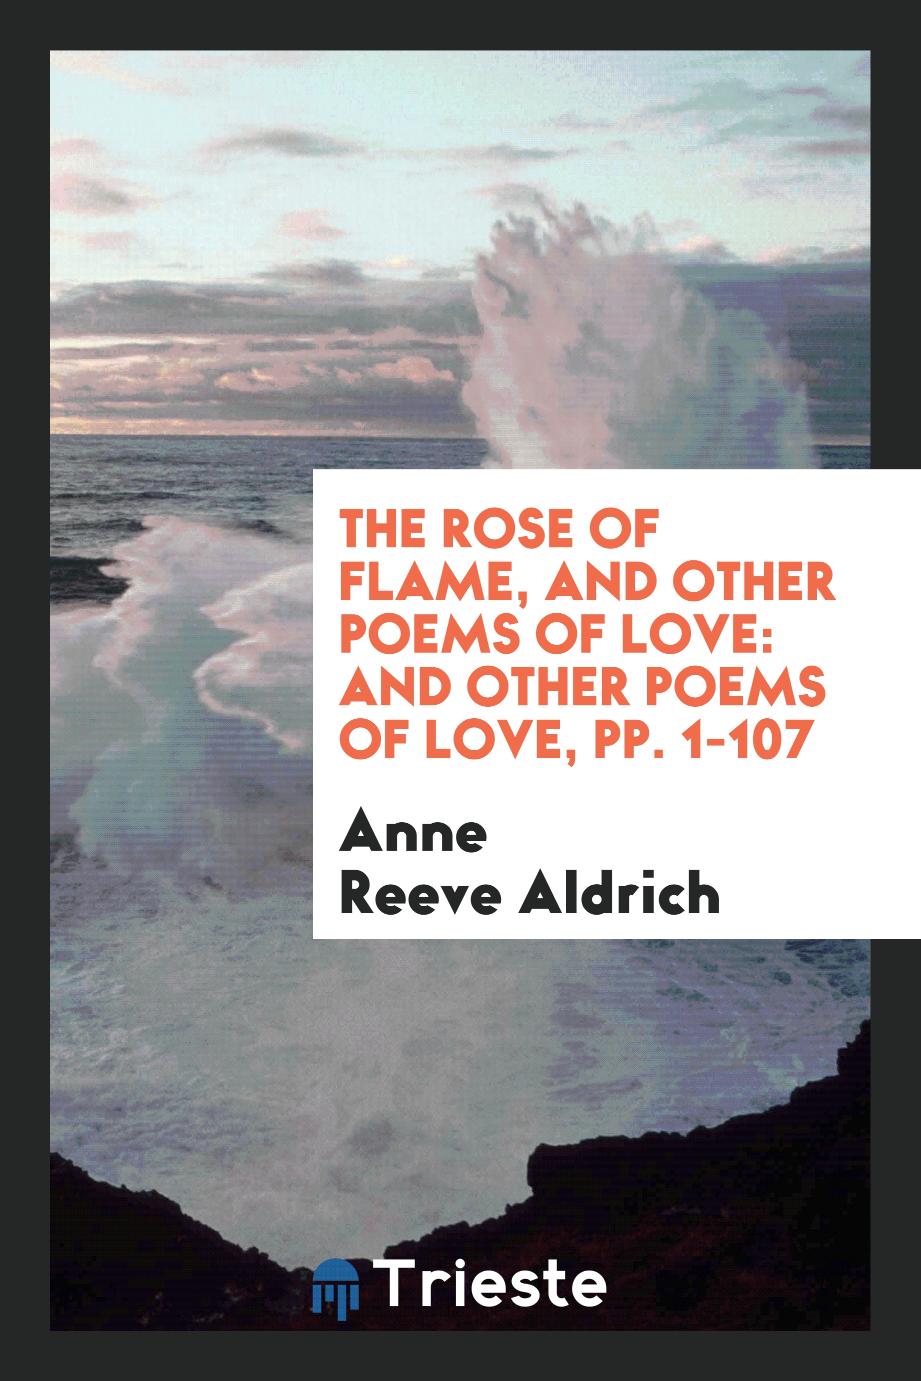 The Rose of Flame, and Other Poems of Love: And Other Poems of Love, pp. 1-107